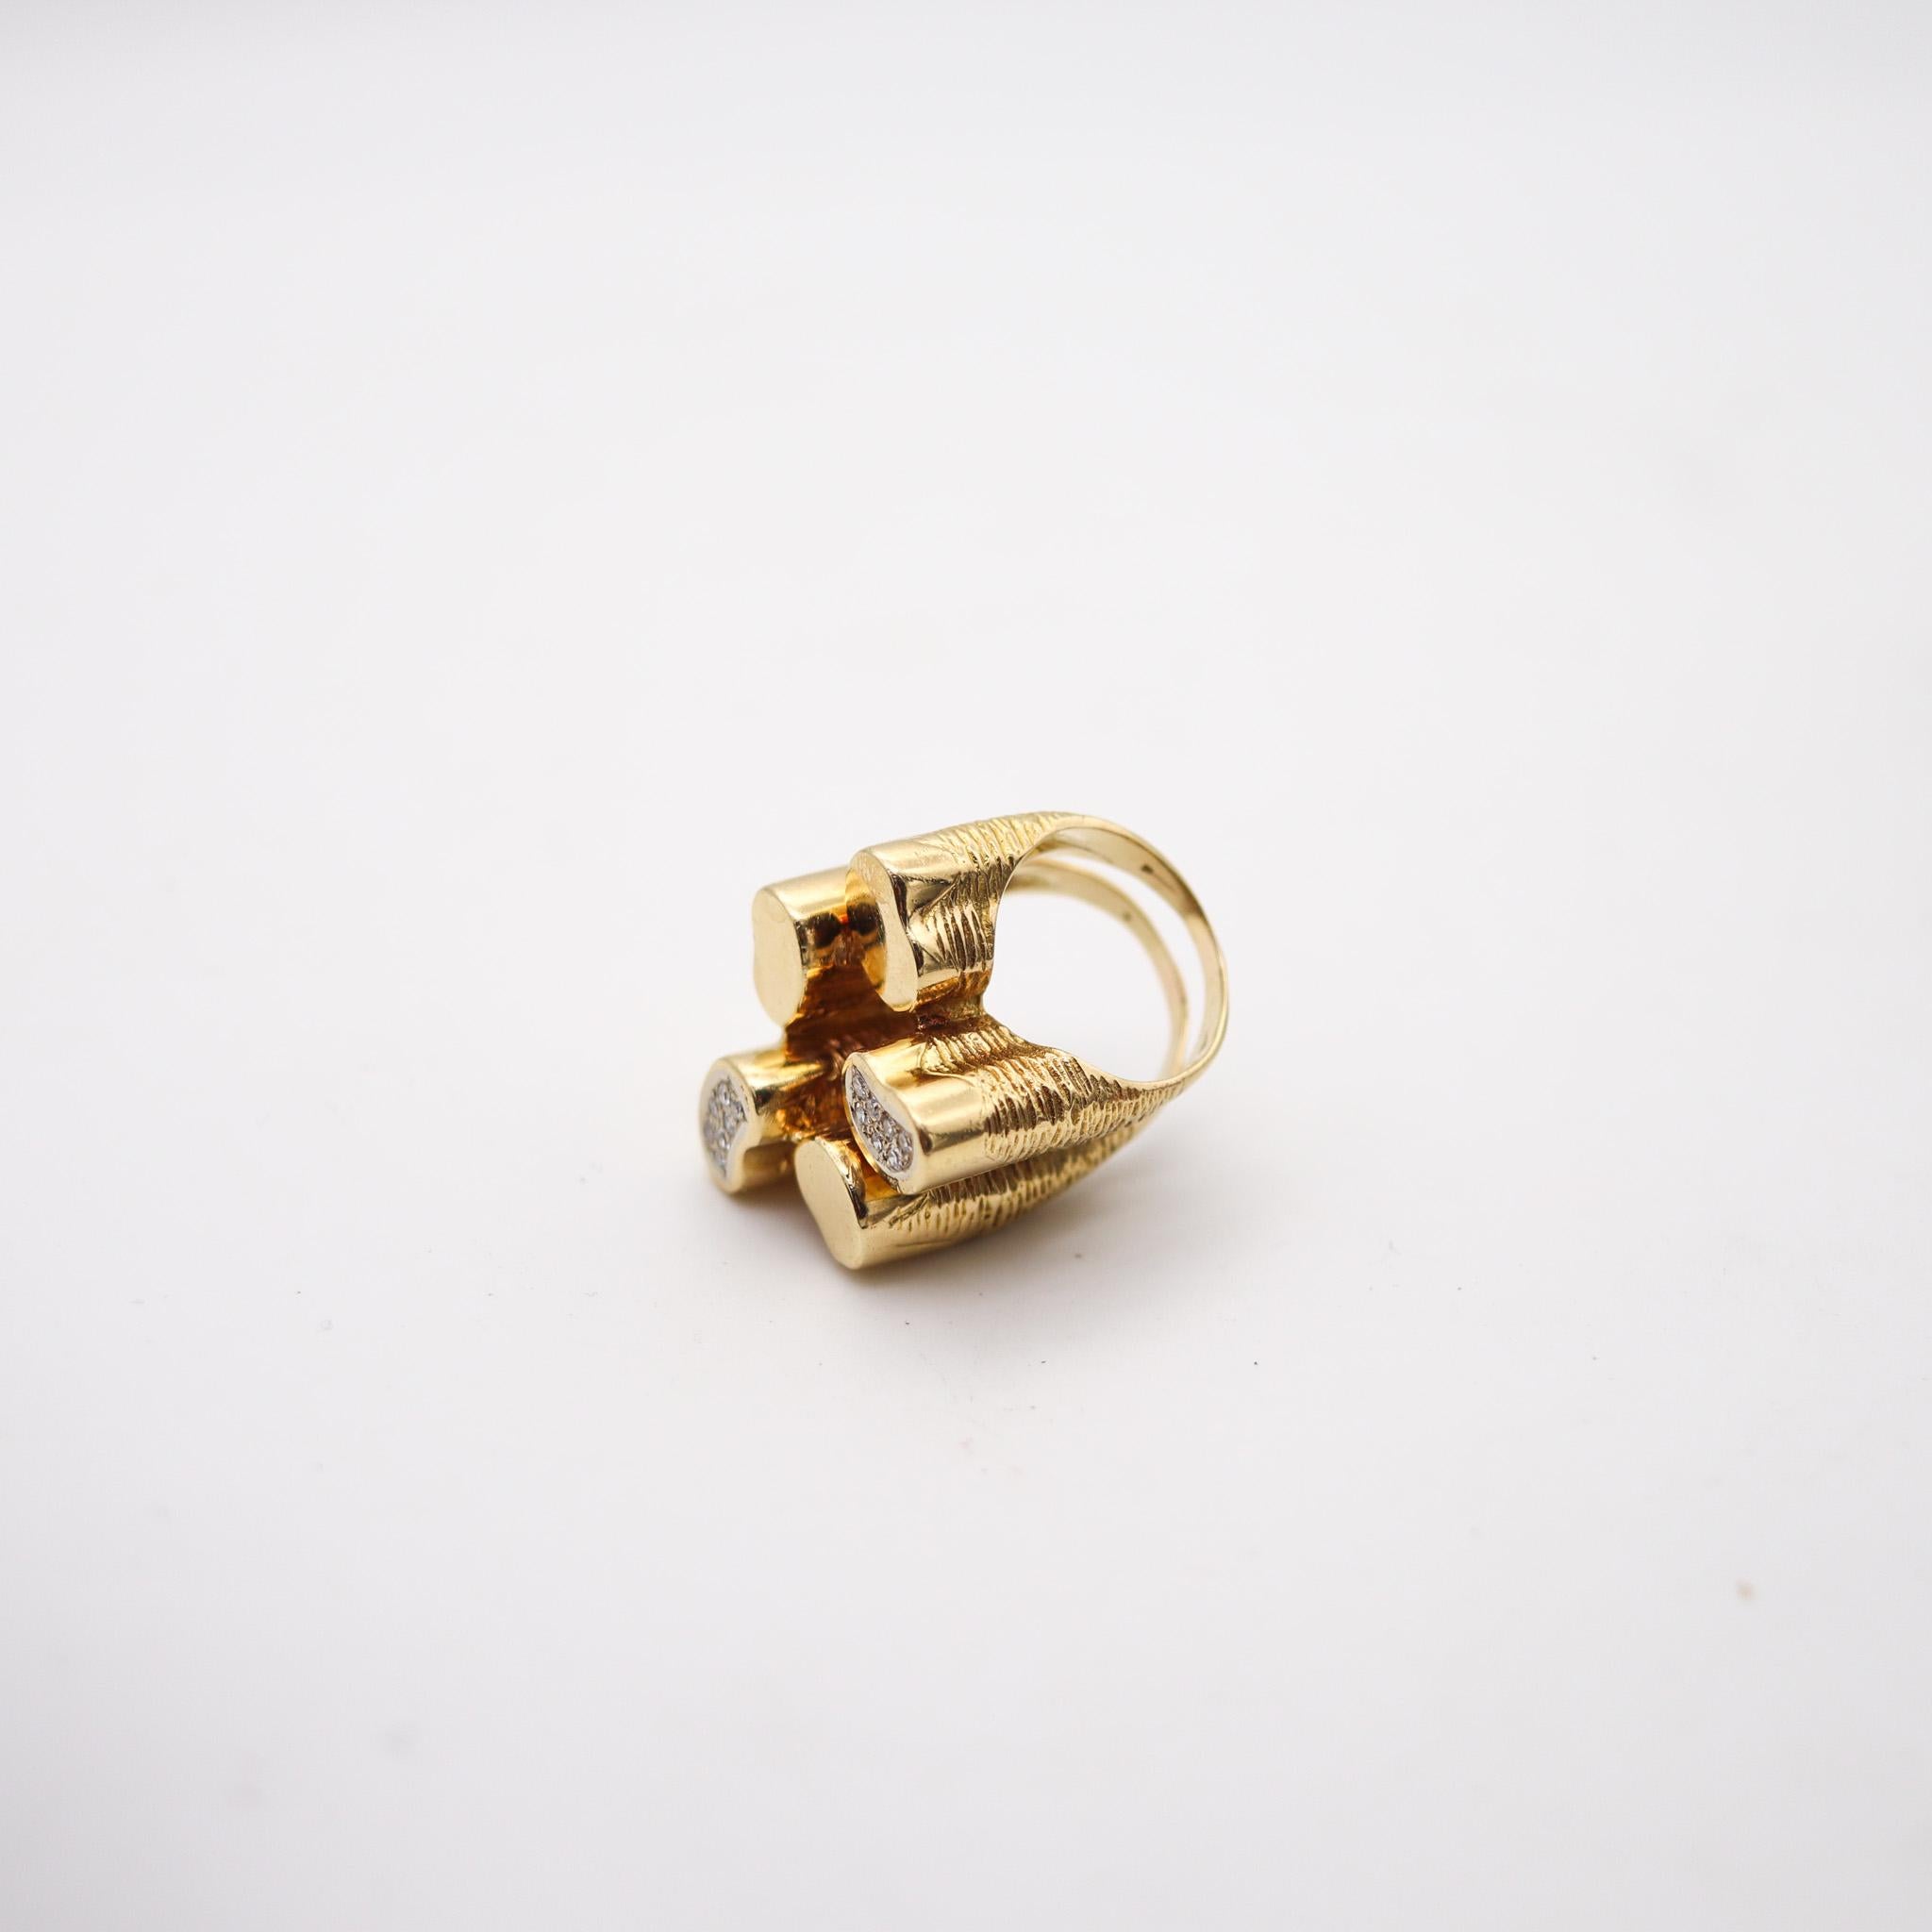 A sculptural Italian cocktail ring.

An statement cocktail ring, created in Italy with sculptural volumetric patterns, back in the 1970. Crafted in levels, with five free form volumes made up in solid yellow gold of 18 karats with textured and